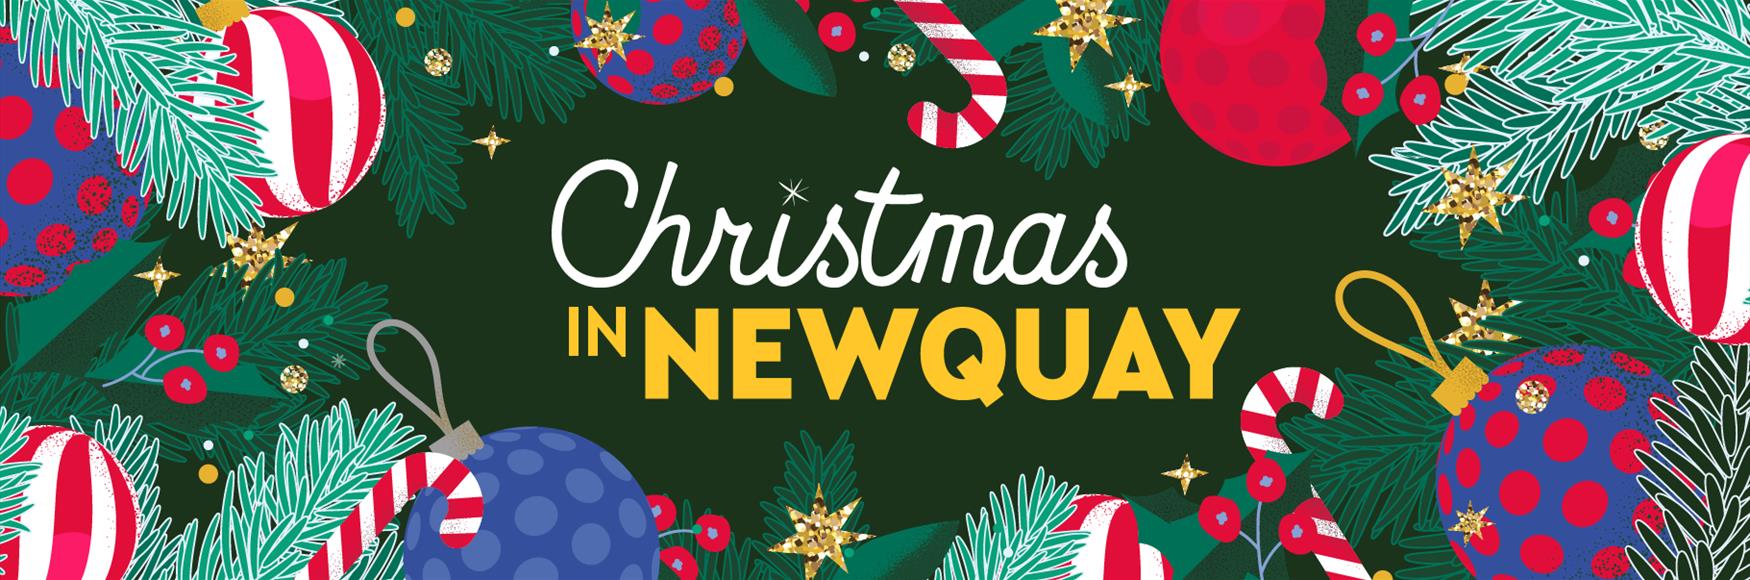 Christmas Events in Newquay